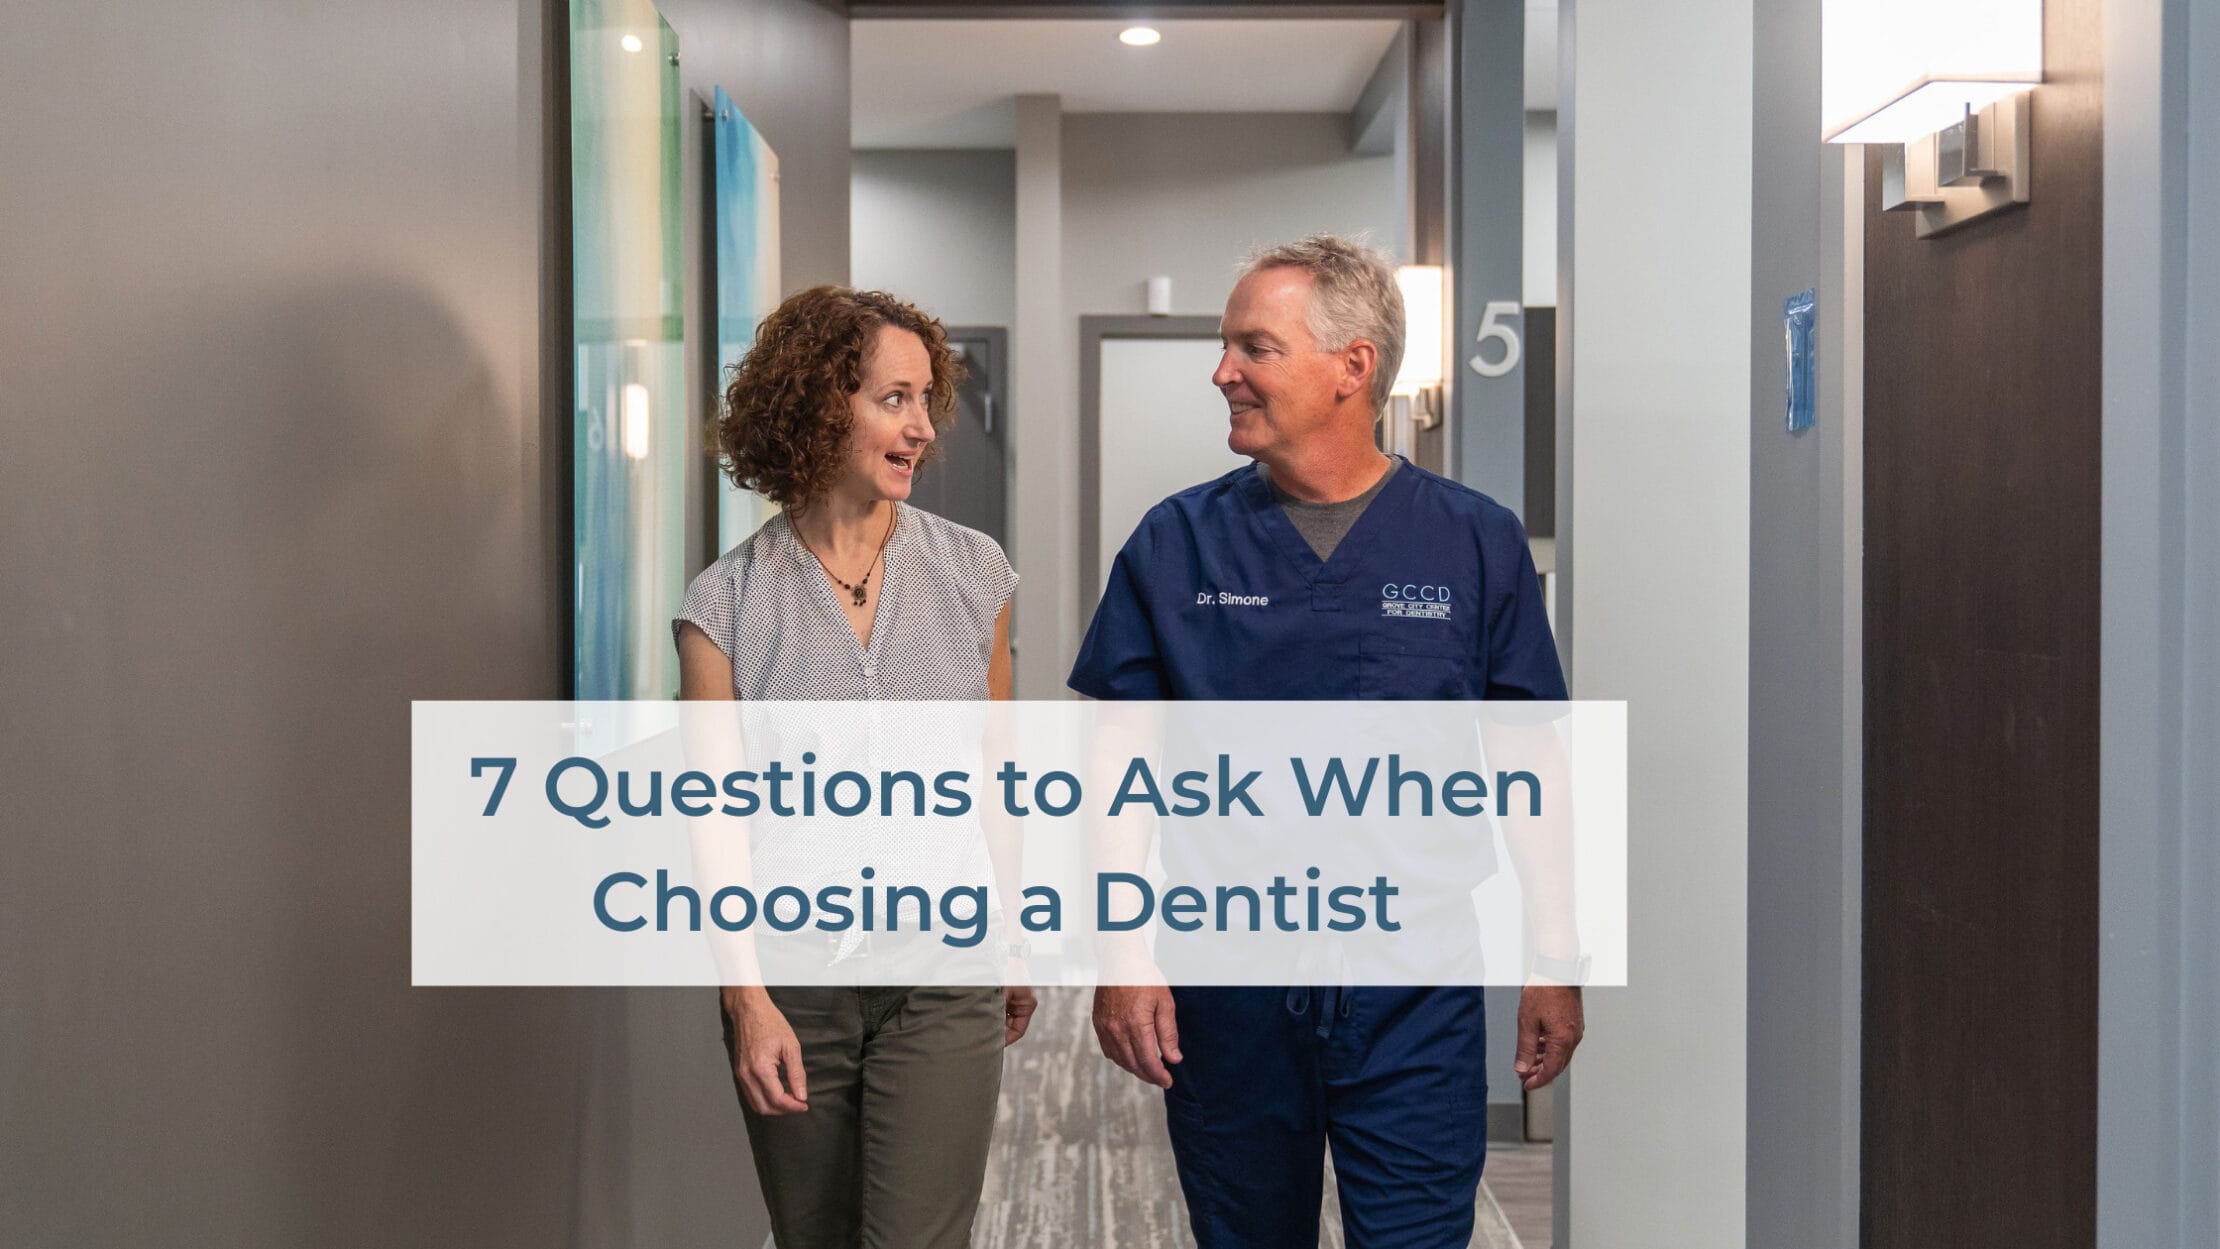 Grove City Center for Dentistry 7 questions to ask when choosing a dentist